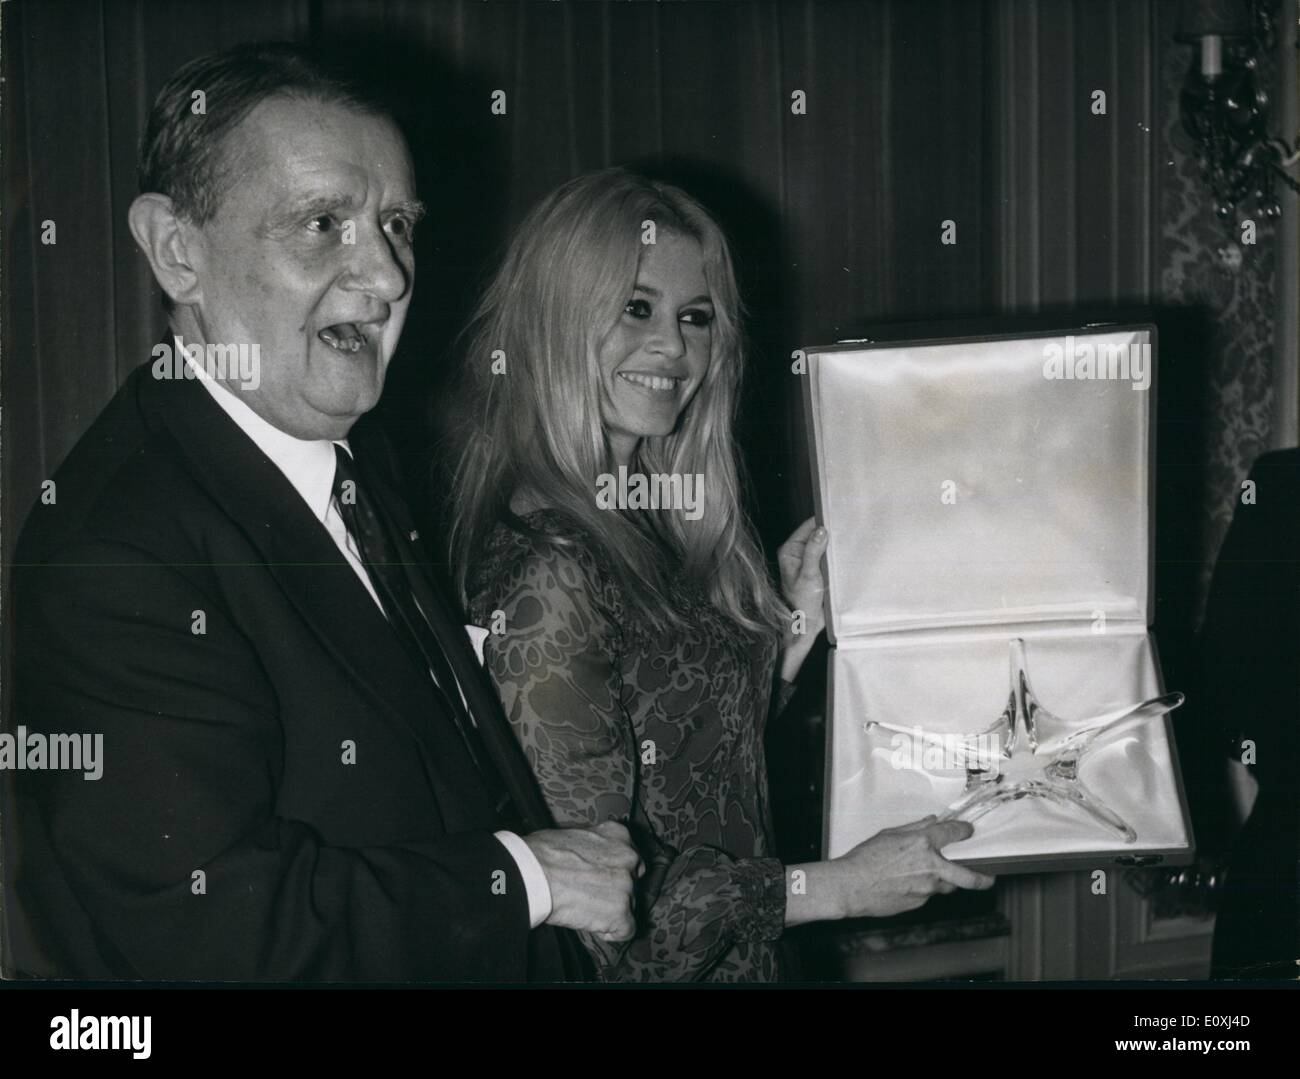 Nov. 11, 1966 - Cristal Dove And Star For B.B.: Brigitte Bardot Was One Of The Recipients Of The Cristal Dove, A Special Award Granted By The French Cinema Academy. Photo shows Brigitte Bardot, Pictured With The Ciristal Star. On Left Georges Auric Chairman Of The Academy. Stock Photo